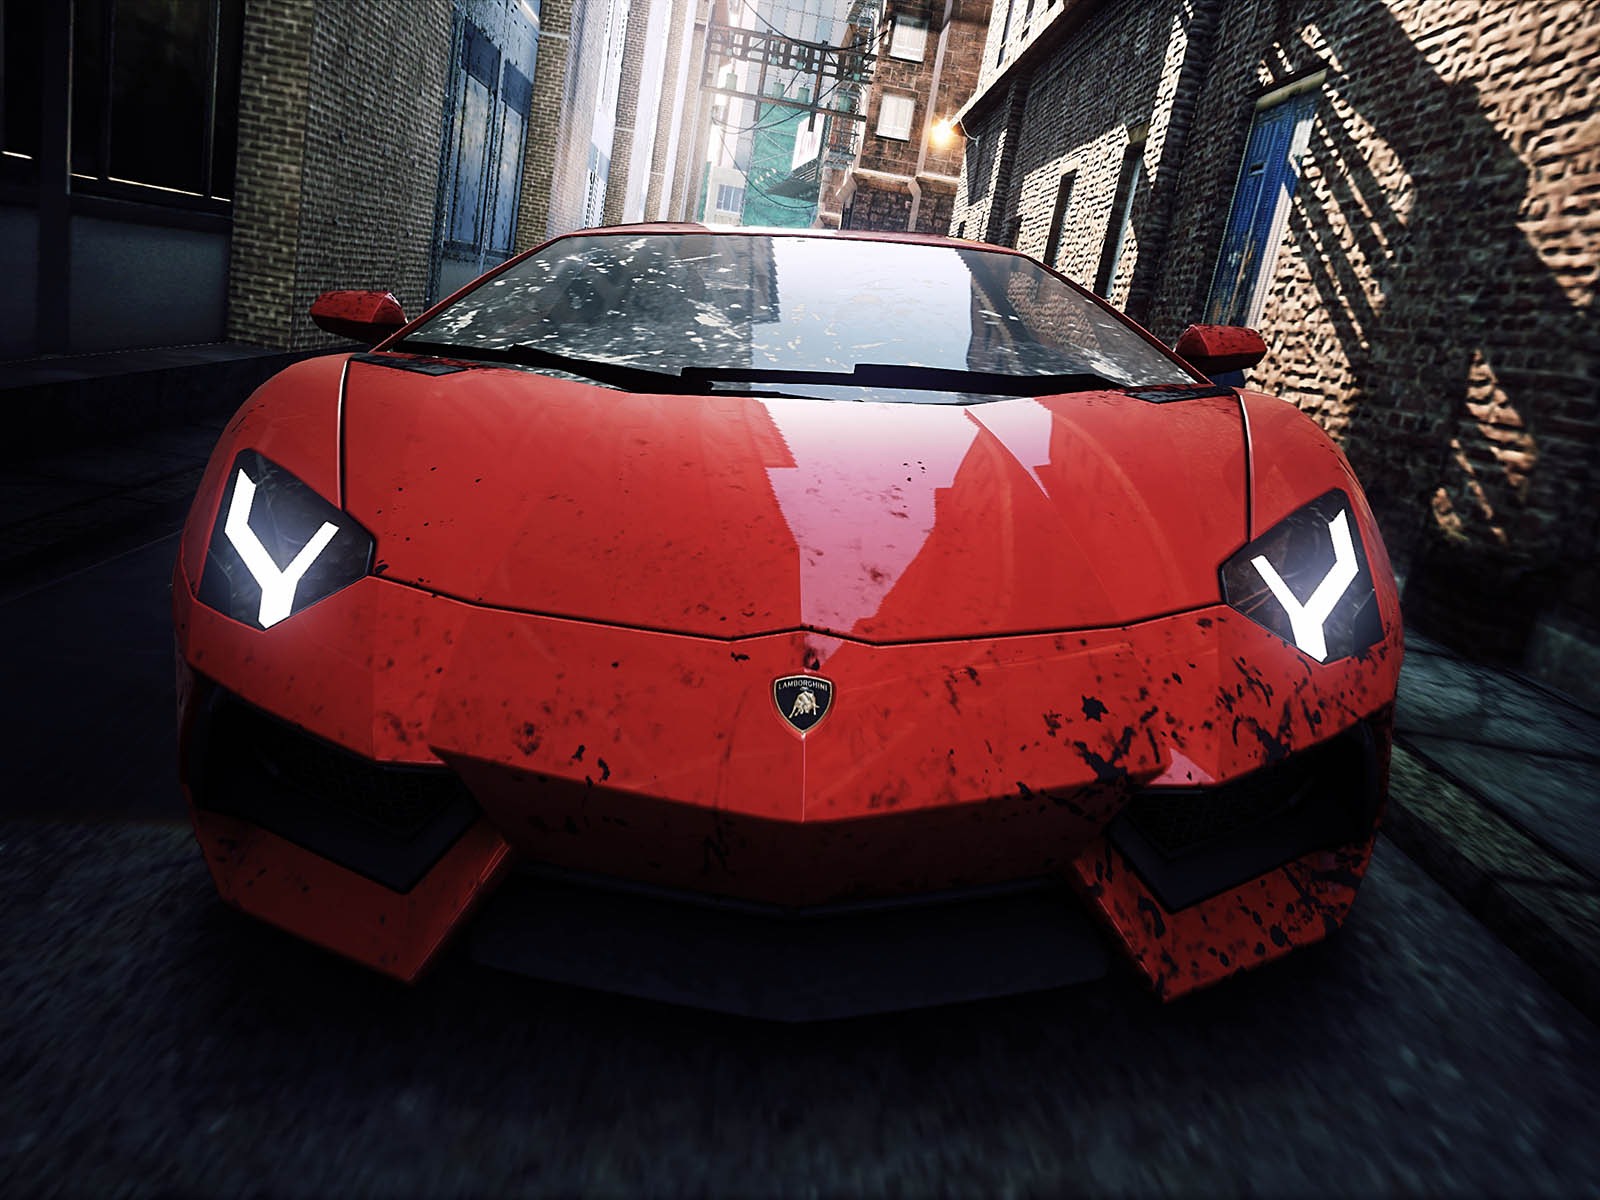 Need for Speed: Most Wanted 极品飞车17：最高通缉 高清壁纸10 - 1600x1200